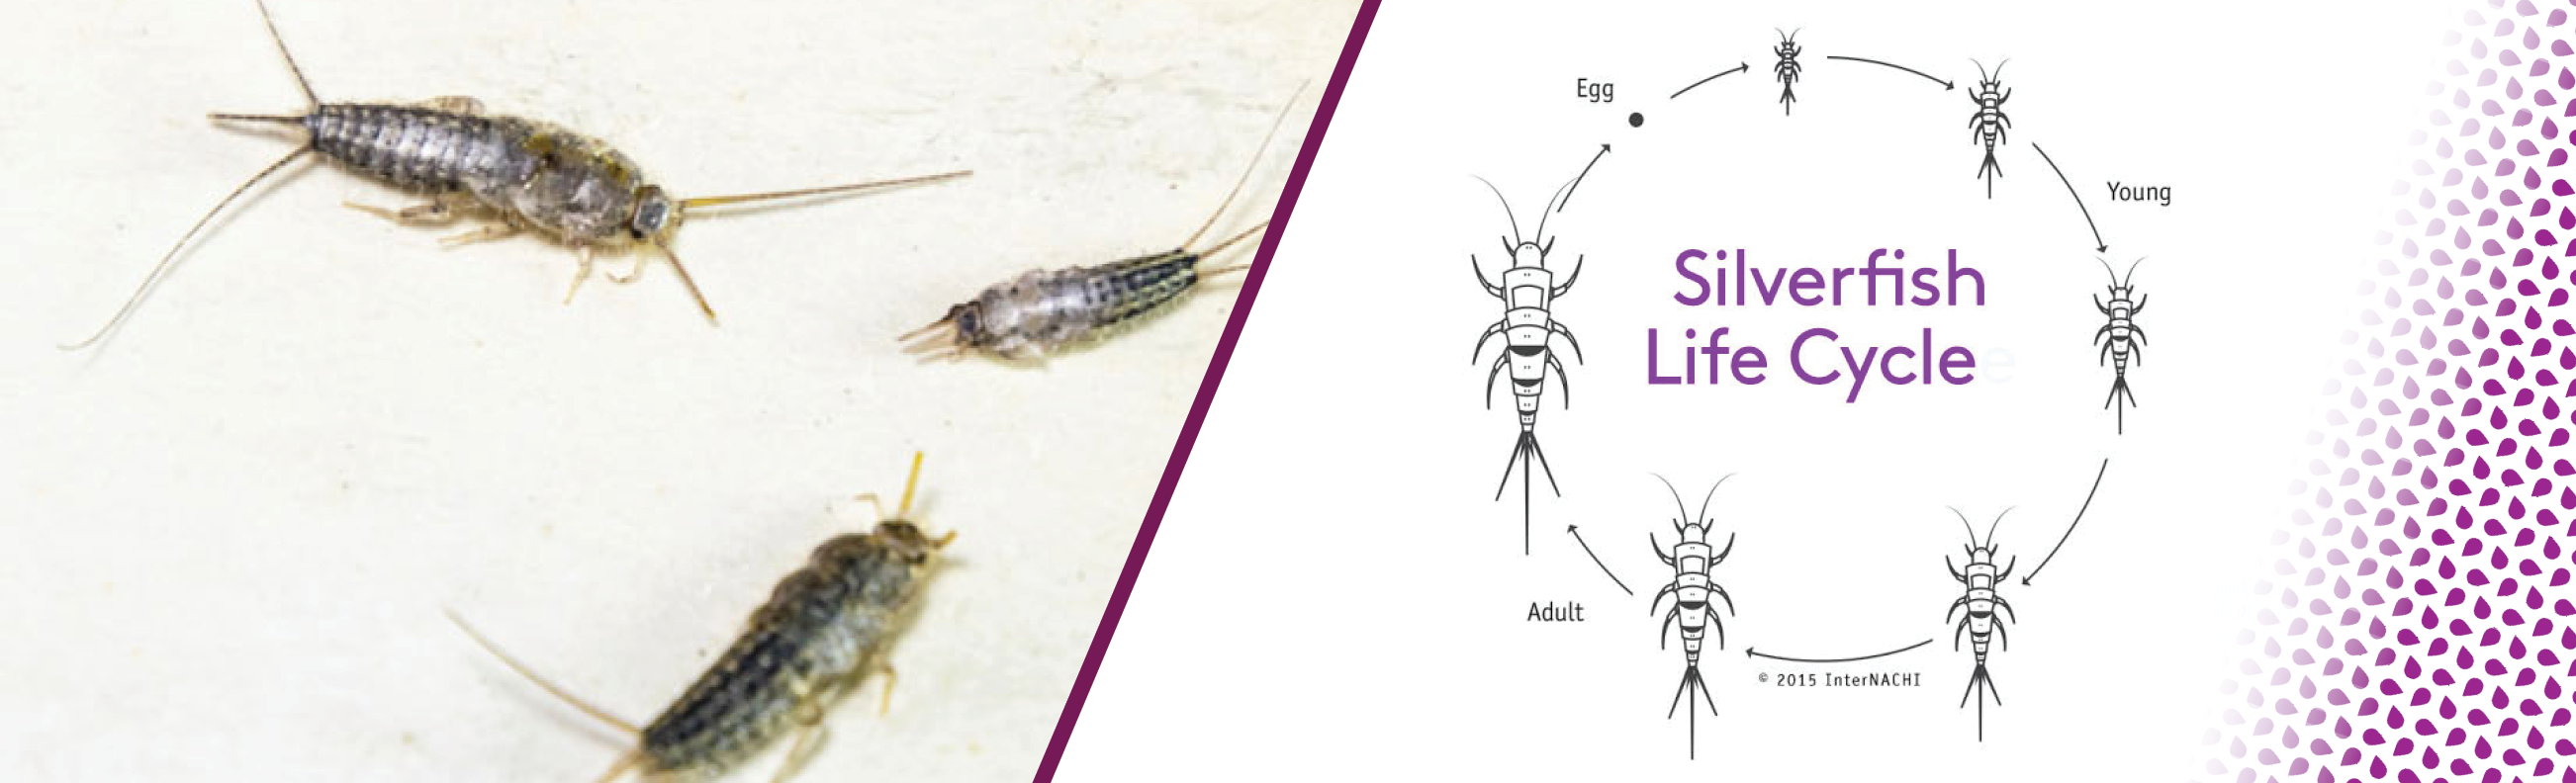 Graphic Silverfish lifecycle